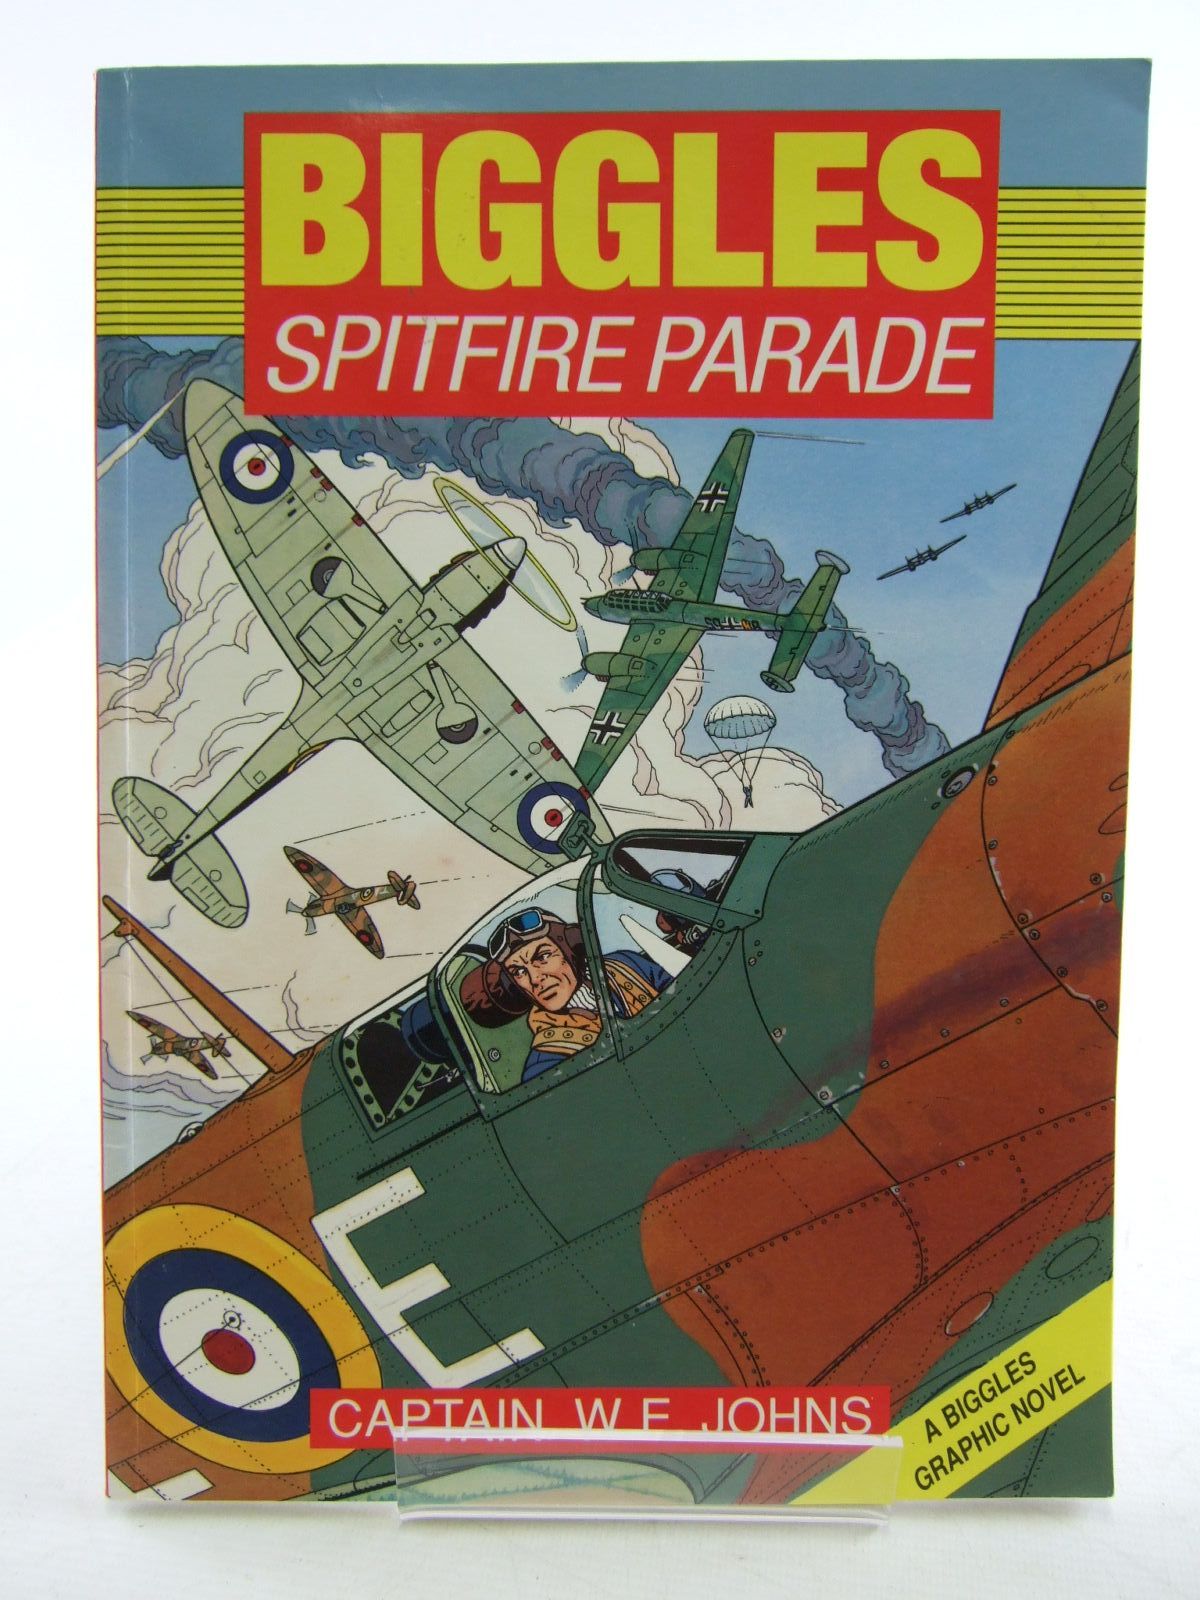 Cover of BIGGLES SPITFIRE PARADE by W.E. Johns